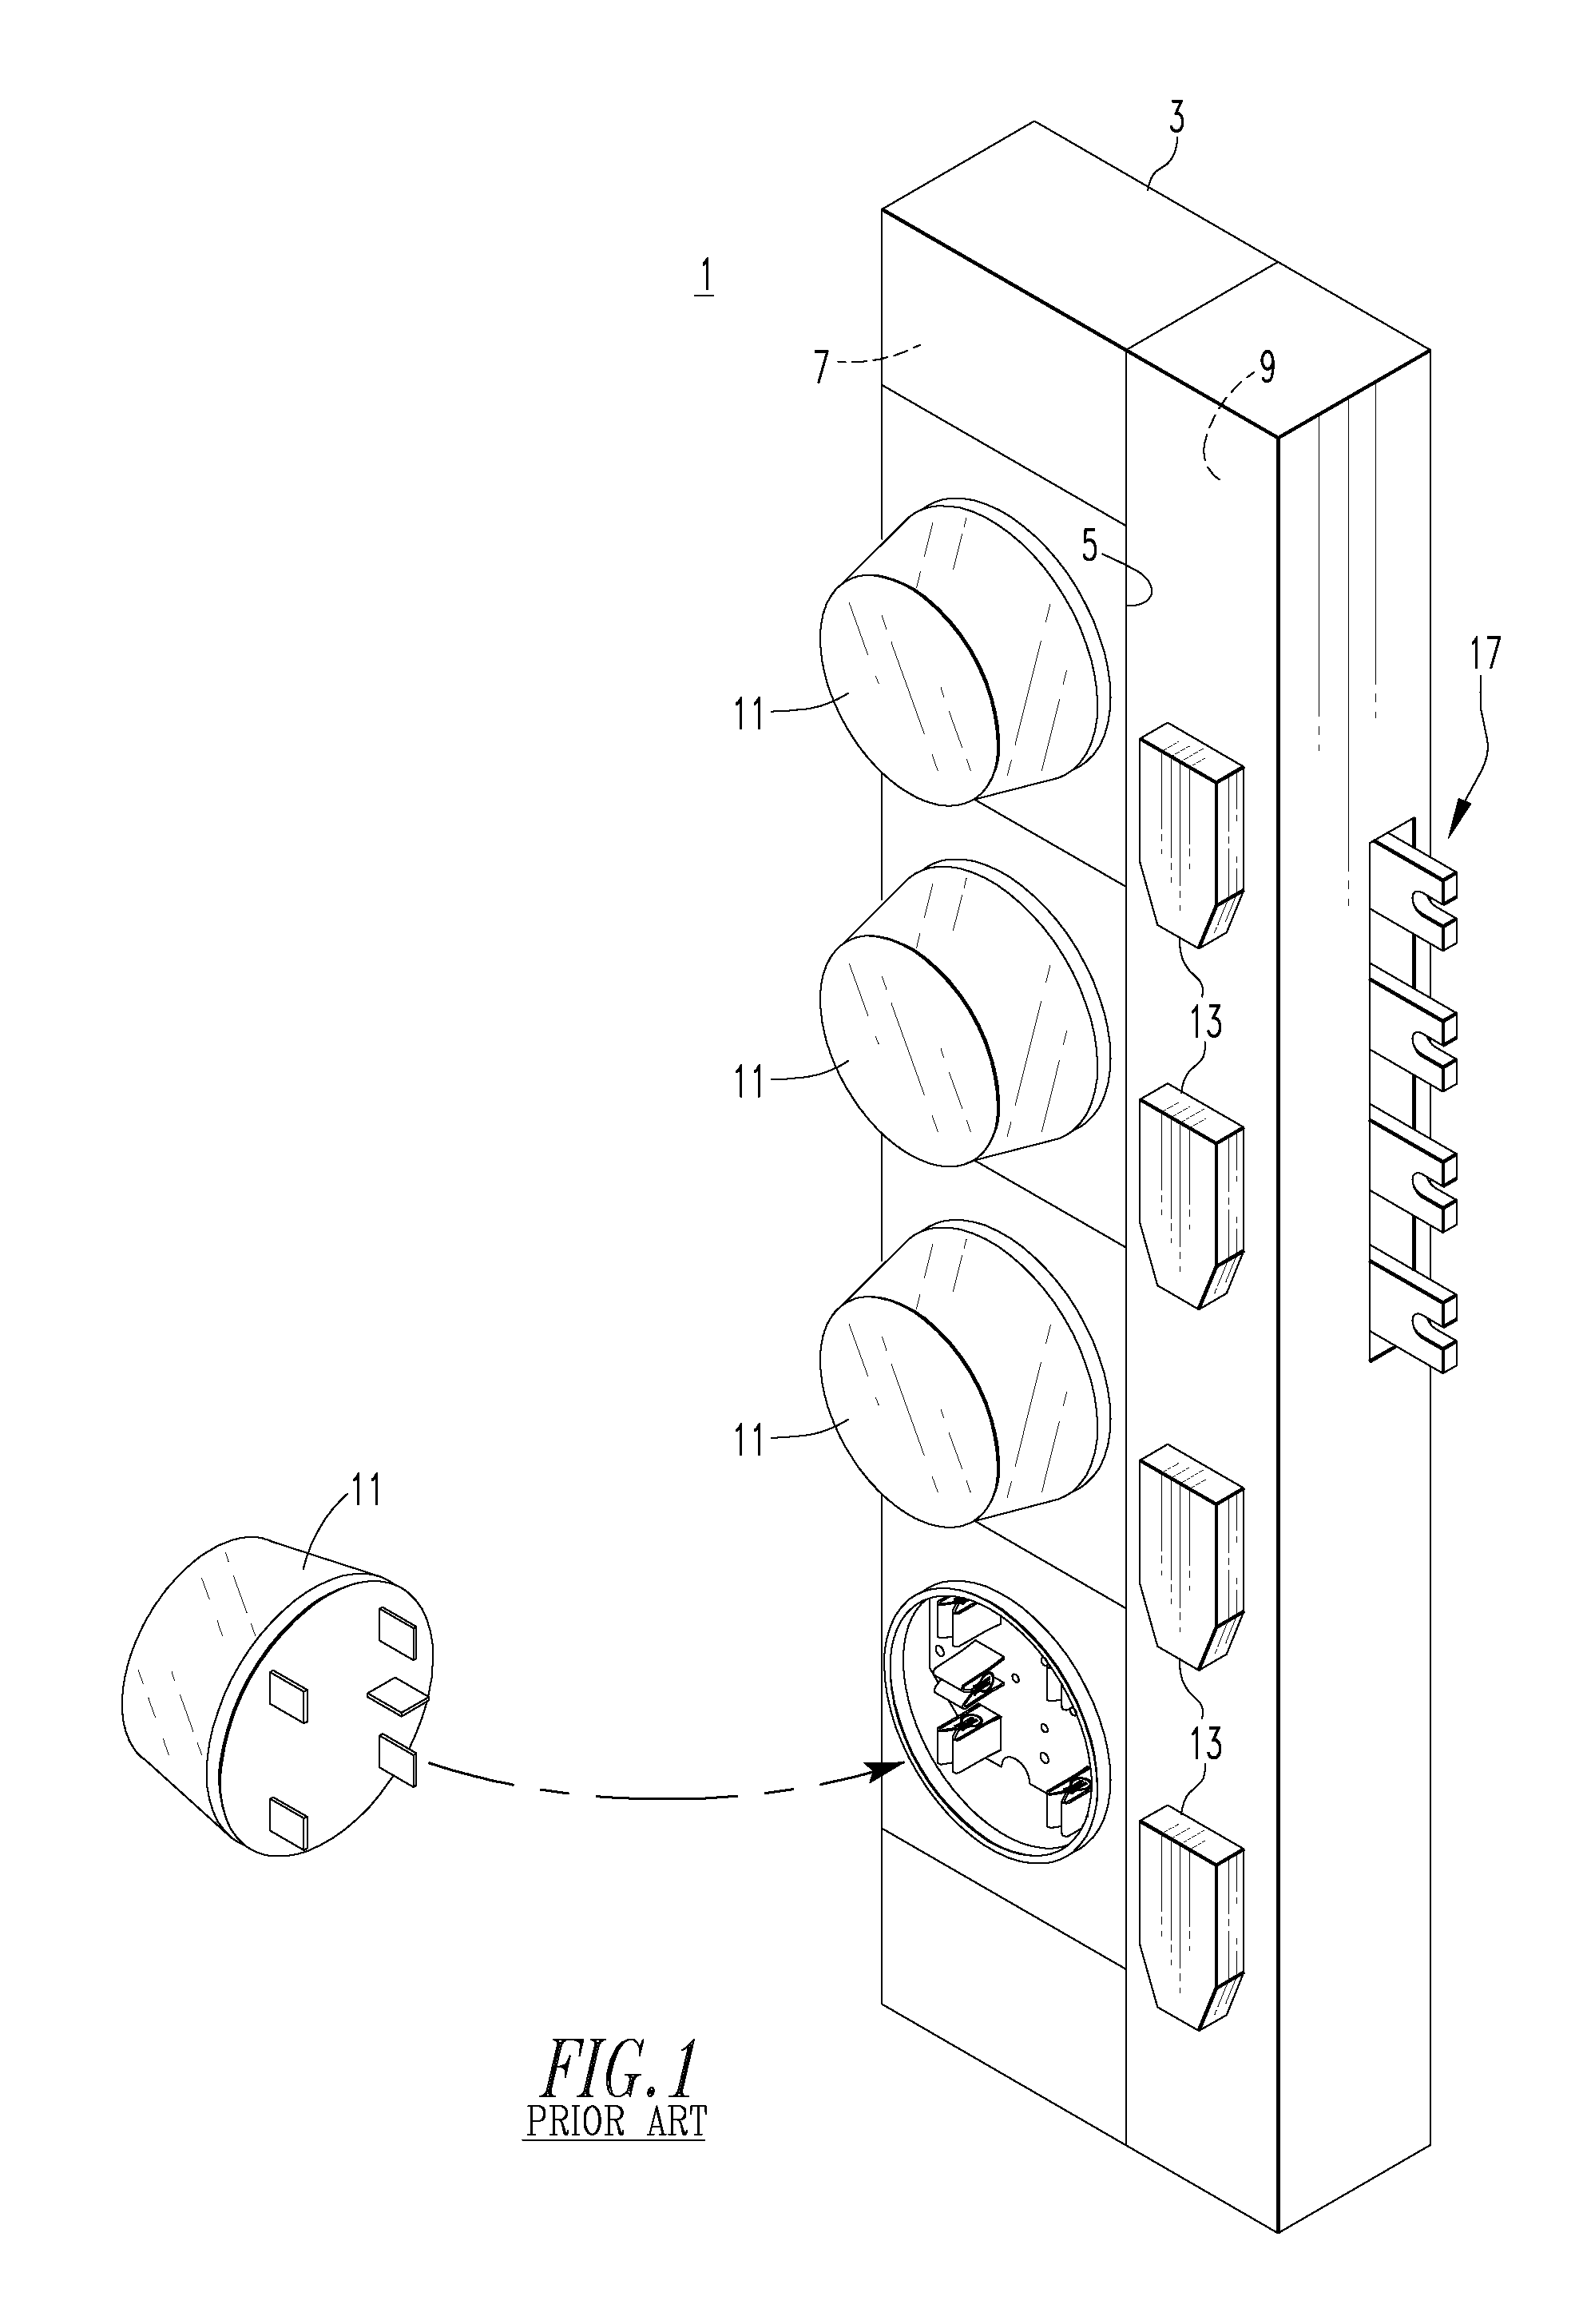 Meter socket assembly employing phase balancing bus jumpers and meter center employing the same